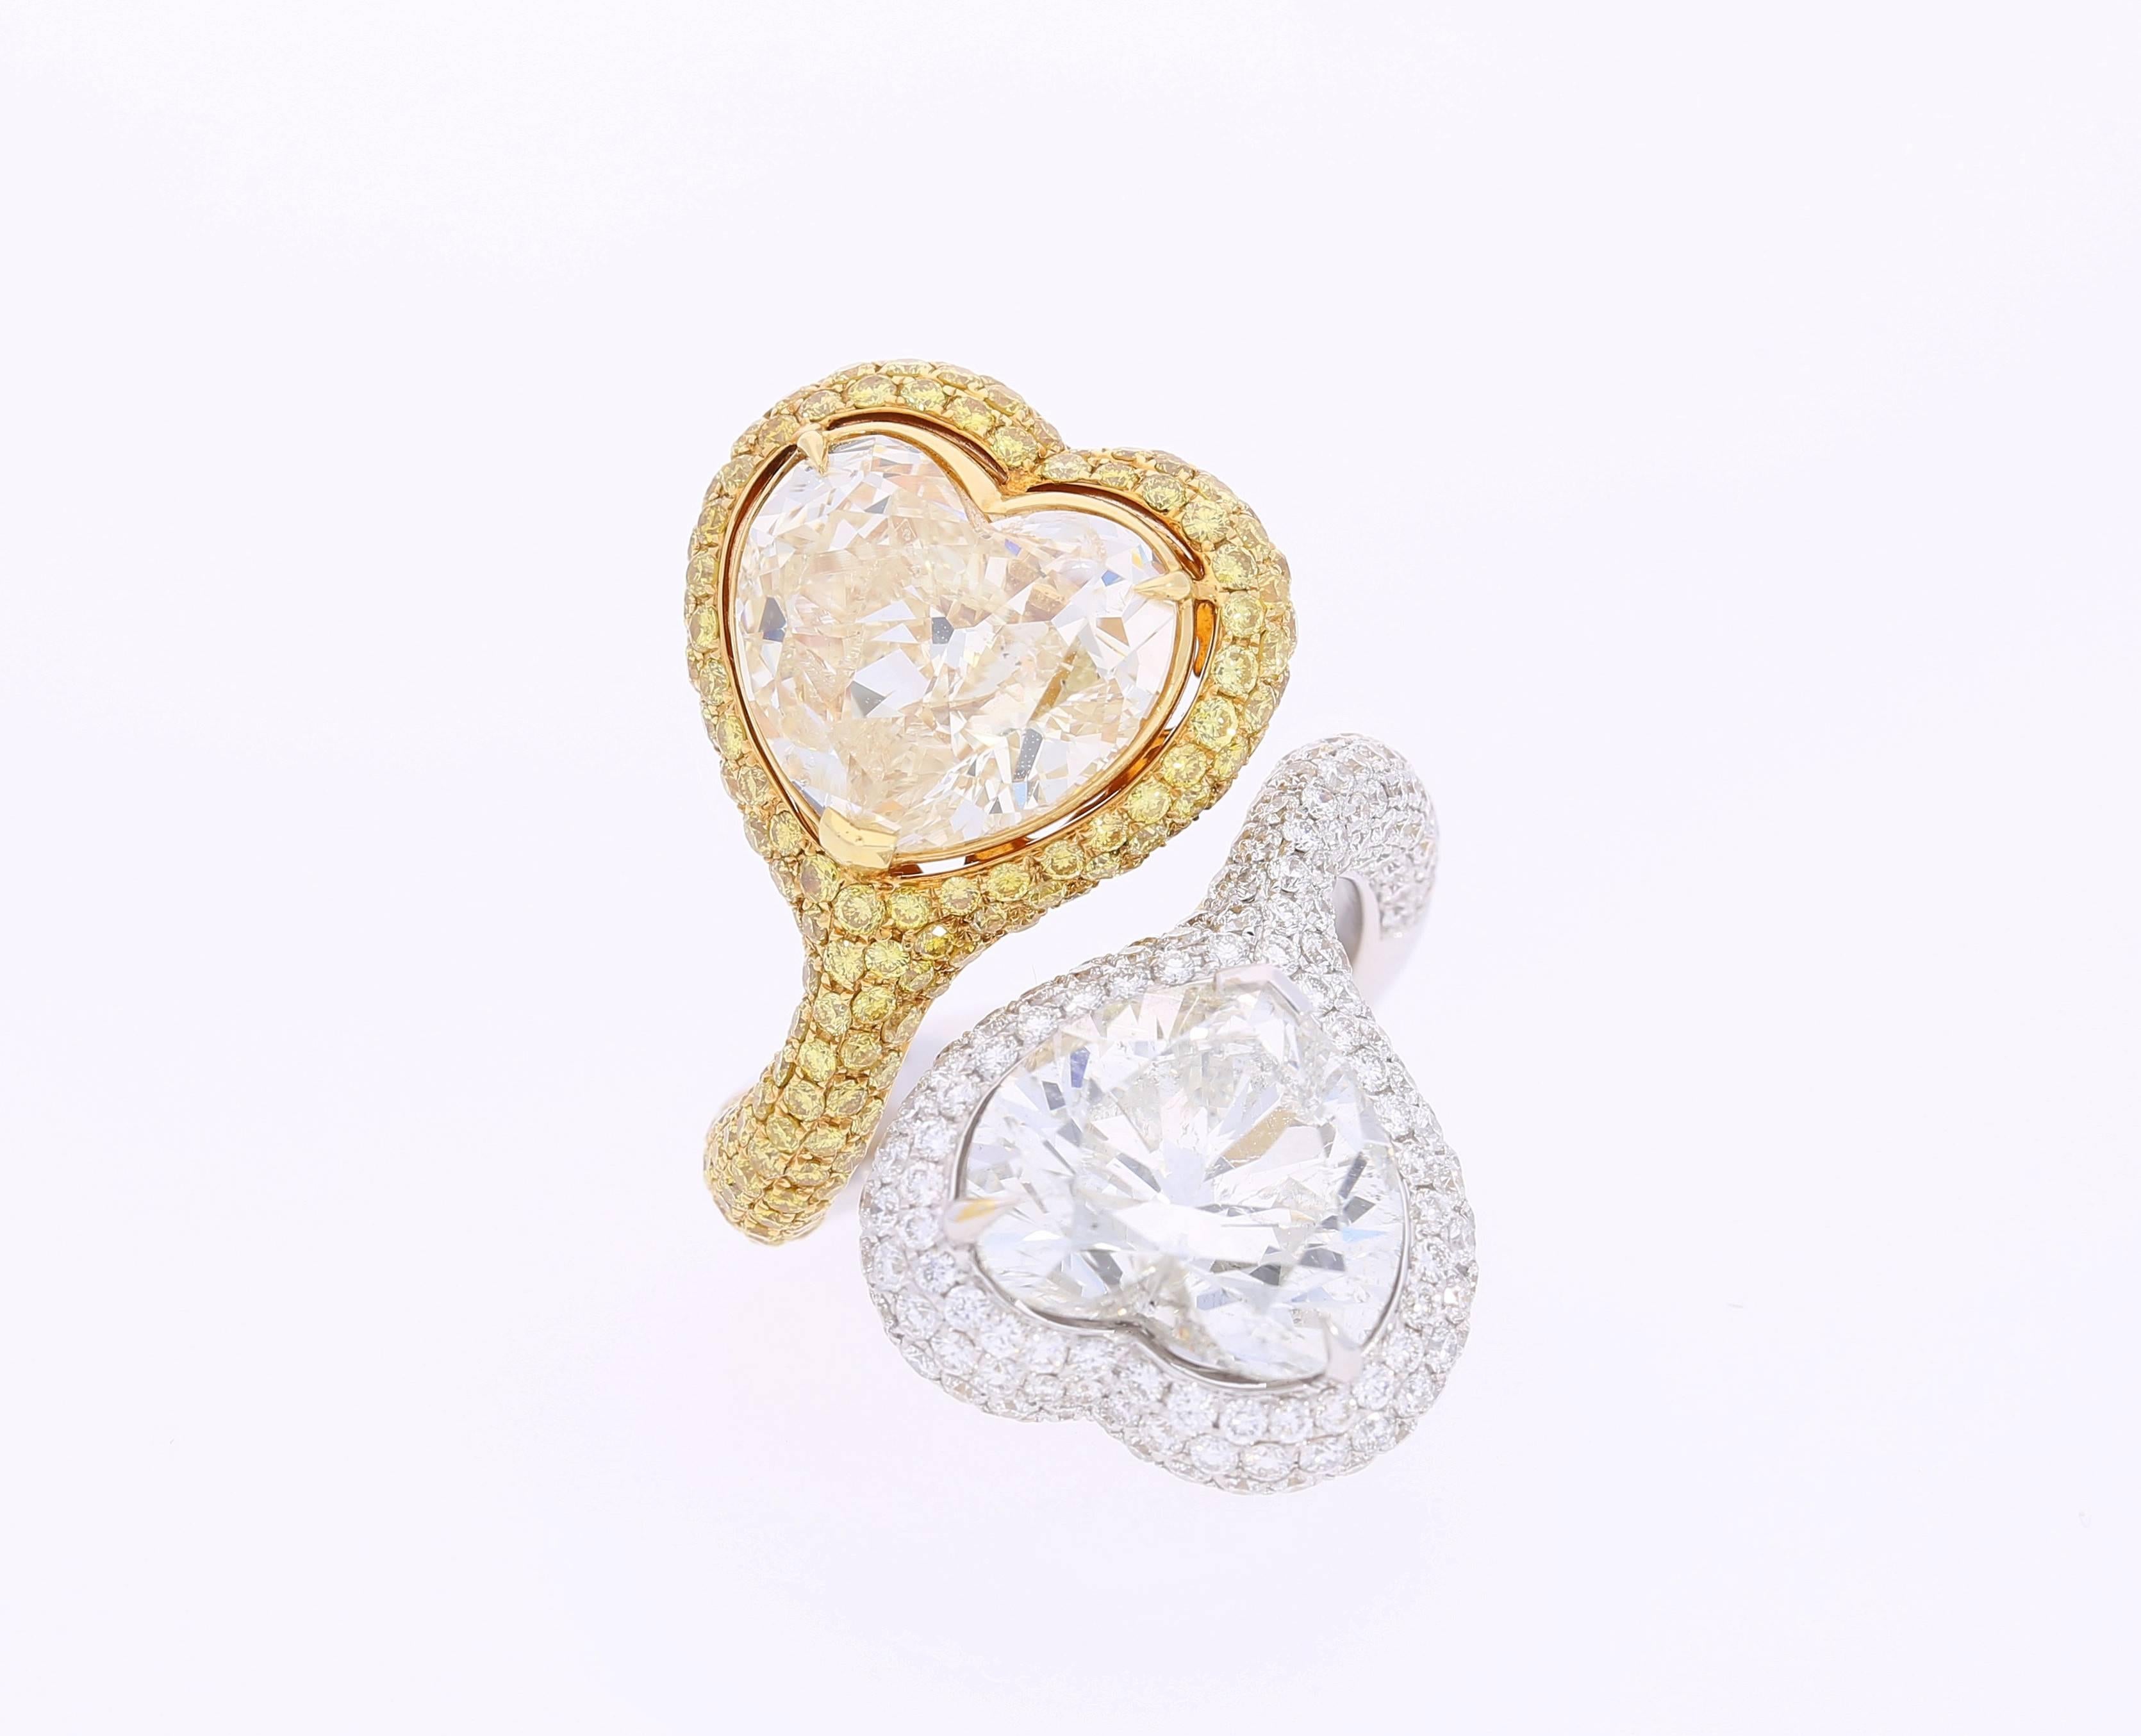 Centering a pair of heart-shape diamonds. The White is a 5.79 carat, G color, SI2 Clarity diamond. The Yellow is Fancy Light Yellow color, 5.73 carats, SI2 clarity. Both are certified by the European Gemological Laboratory. 

Total carat weight-